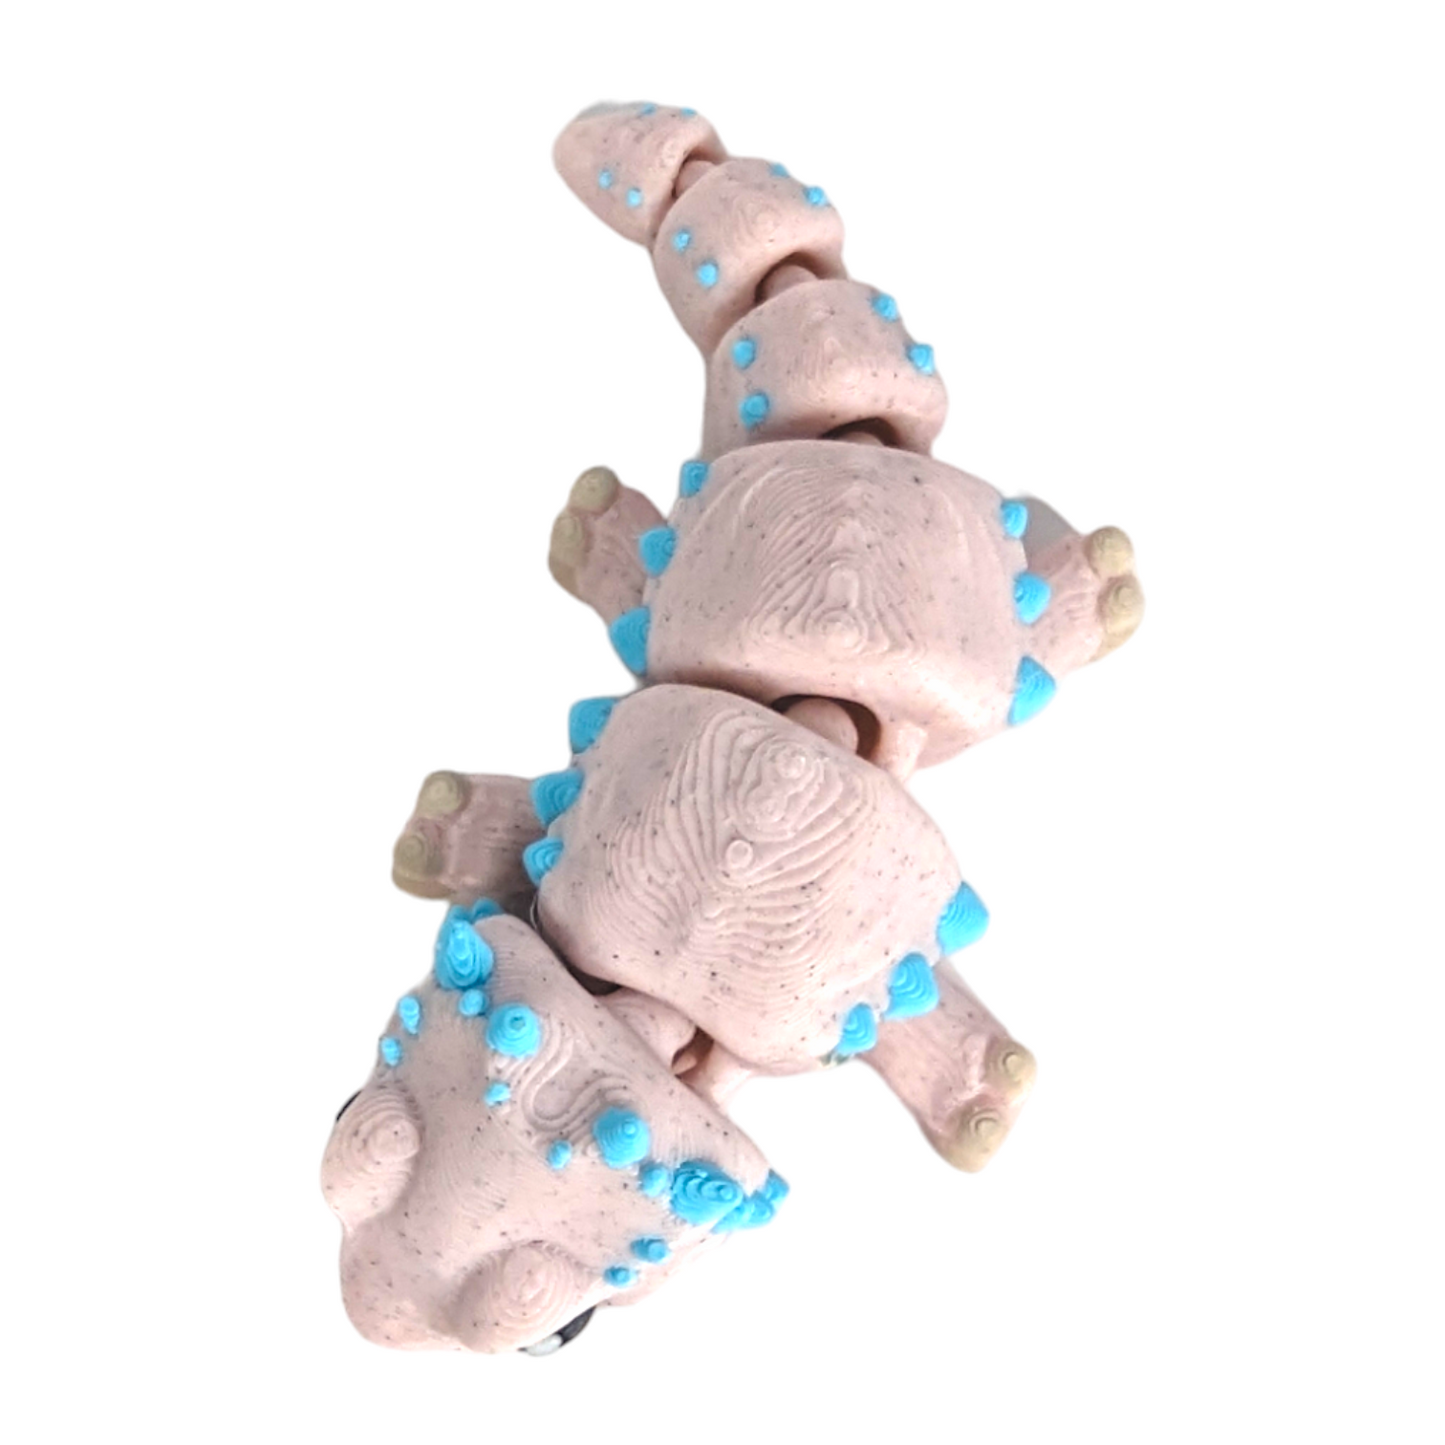 MMMini Bearded Dragon Fidget - 9 points articulation - MatMires Makes